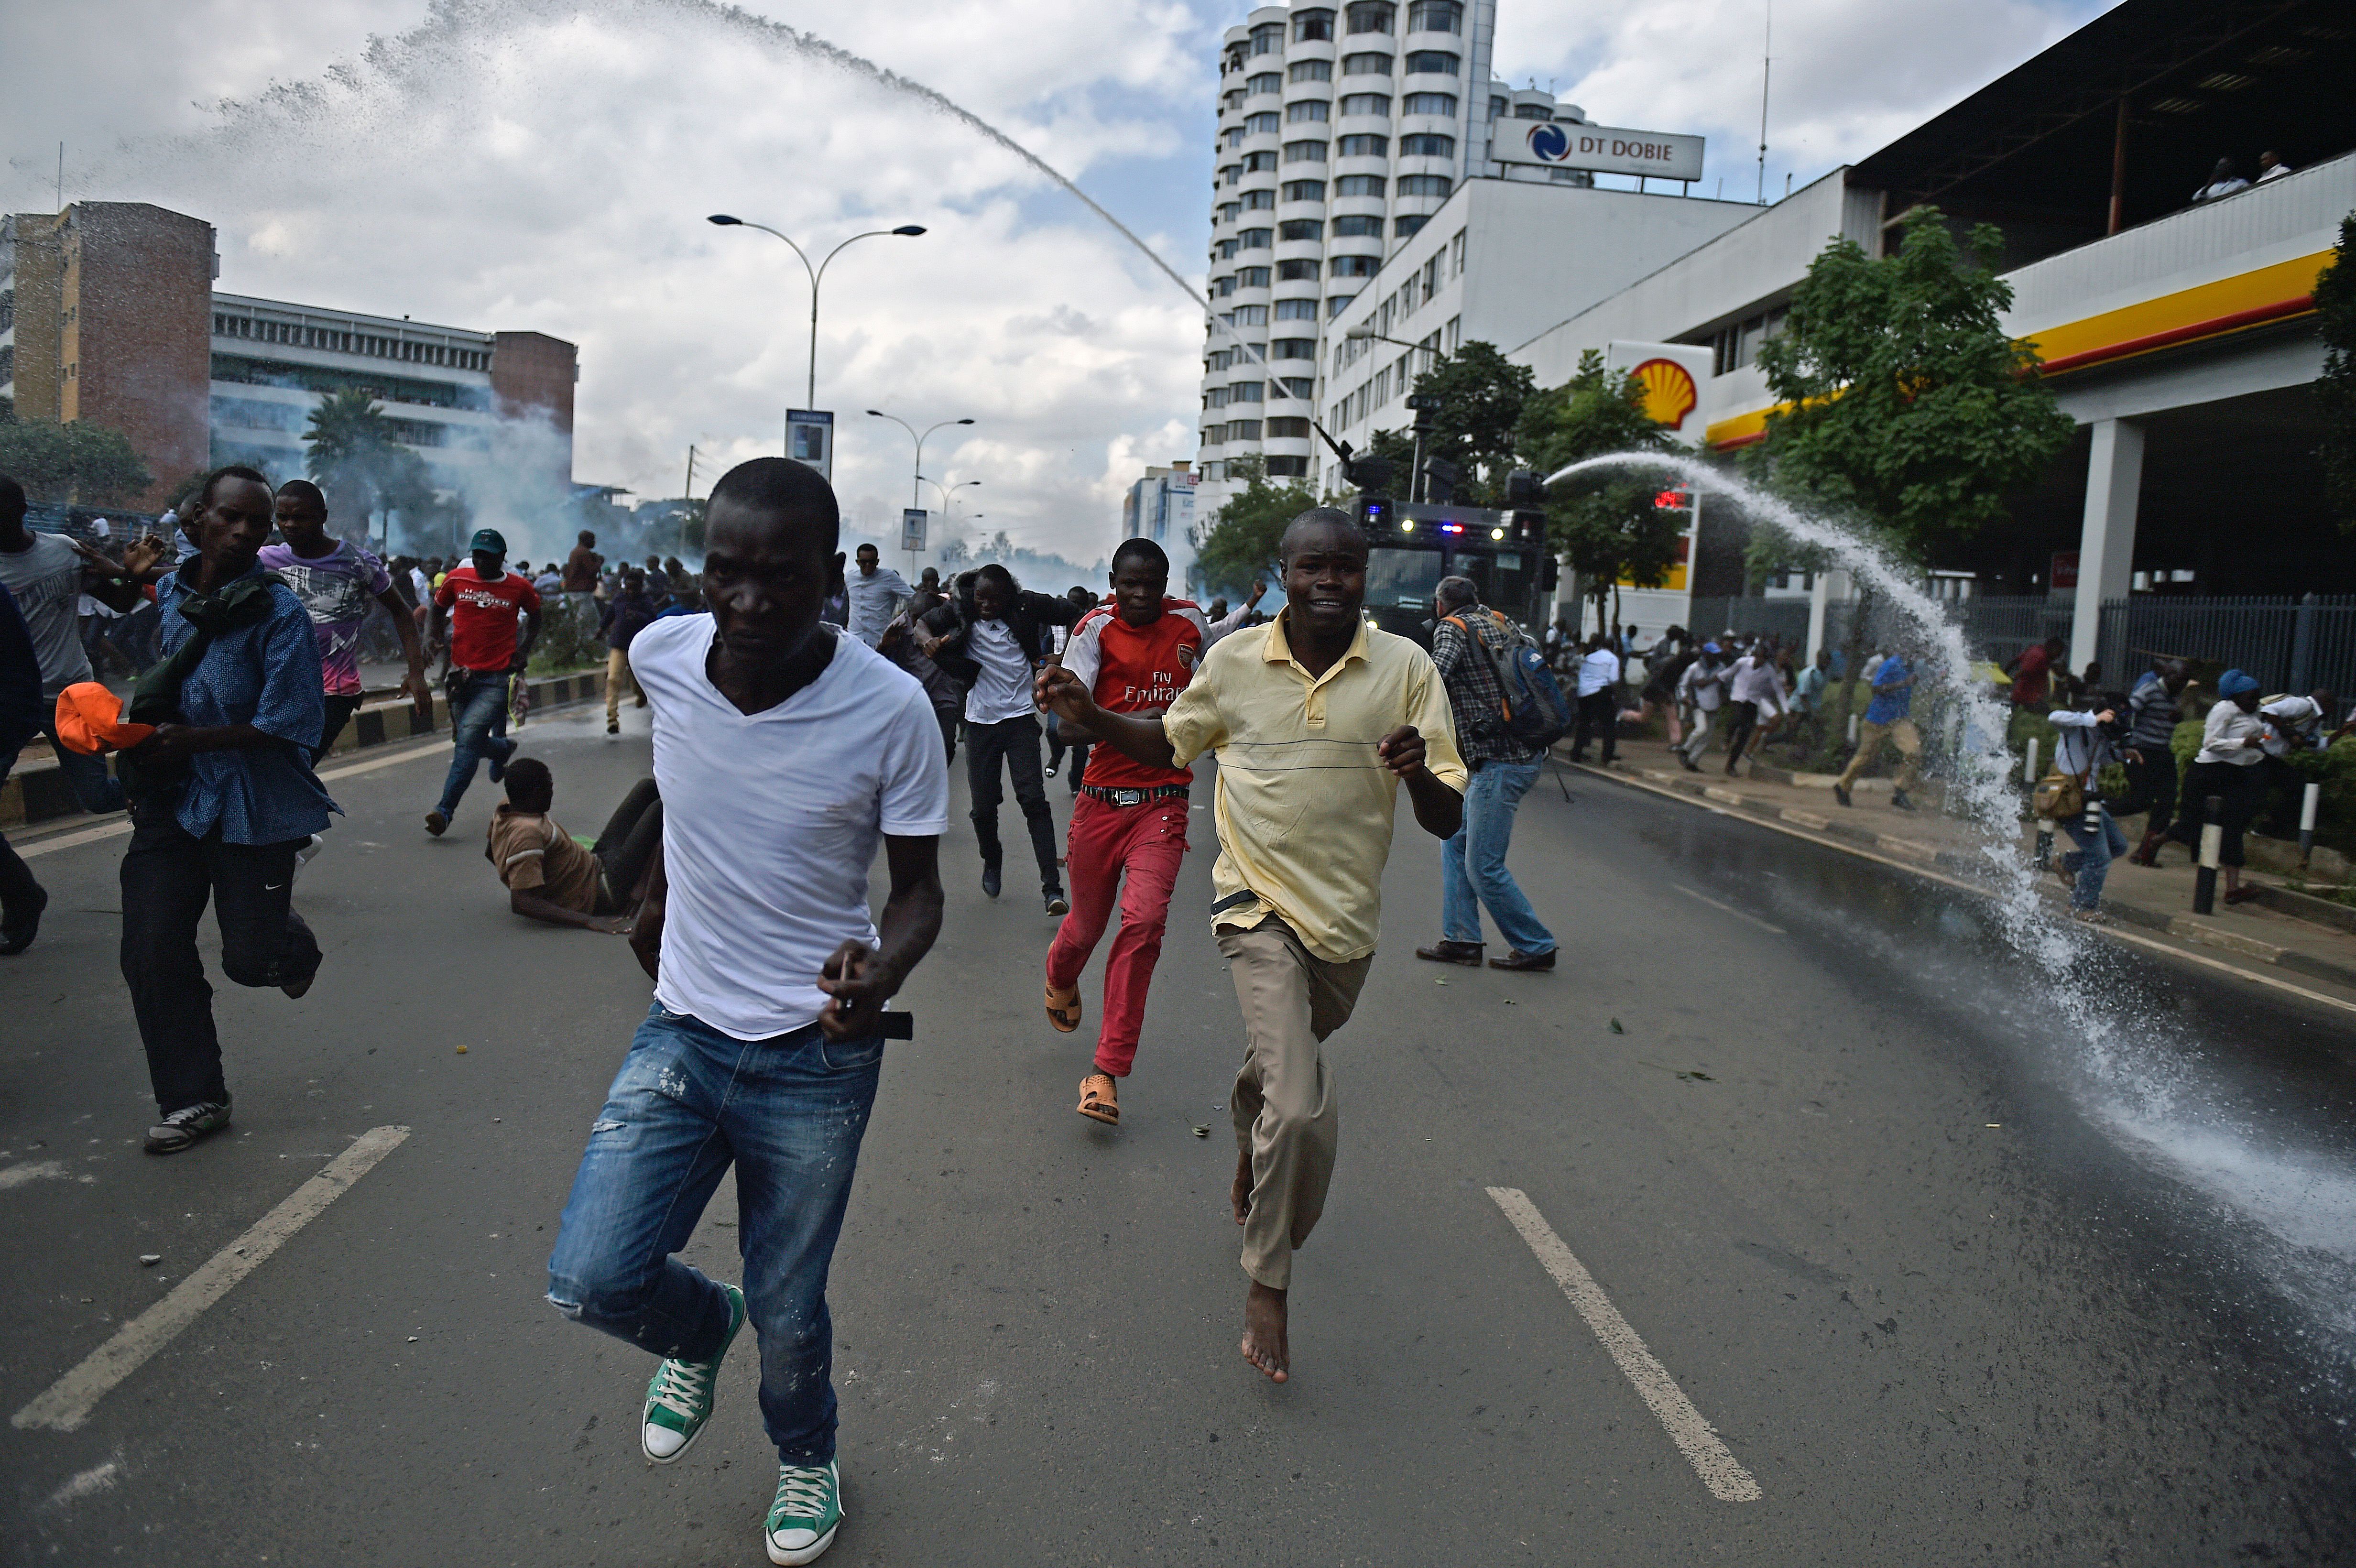 TOPSHOT - Protestors run from water canons after Kenya's opposition supporters demonstrated in Nairobi, on May 16, 2016. Opposition protestors led by former Prime Minister Raila Odinga had gathered outside the Indepedent Electoral and Boundaries Comission building to demand the dismissal of IEBC commissioners from office citing alleged bias towards the ruling Jubillee Alliance Party. / AFP / CARL DE SOUZA        (Photo credit should read CARL DE SOUZA/AFP/Getty Images)